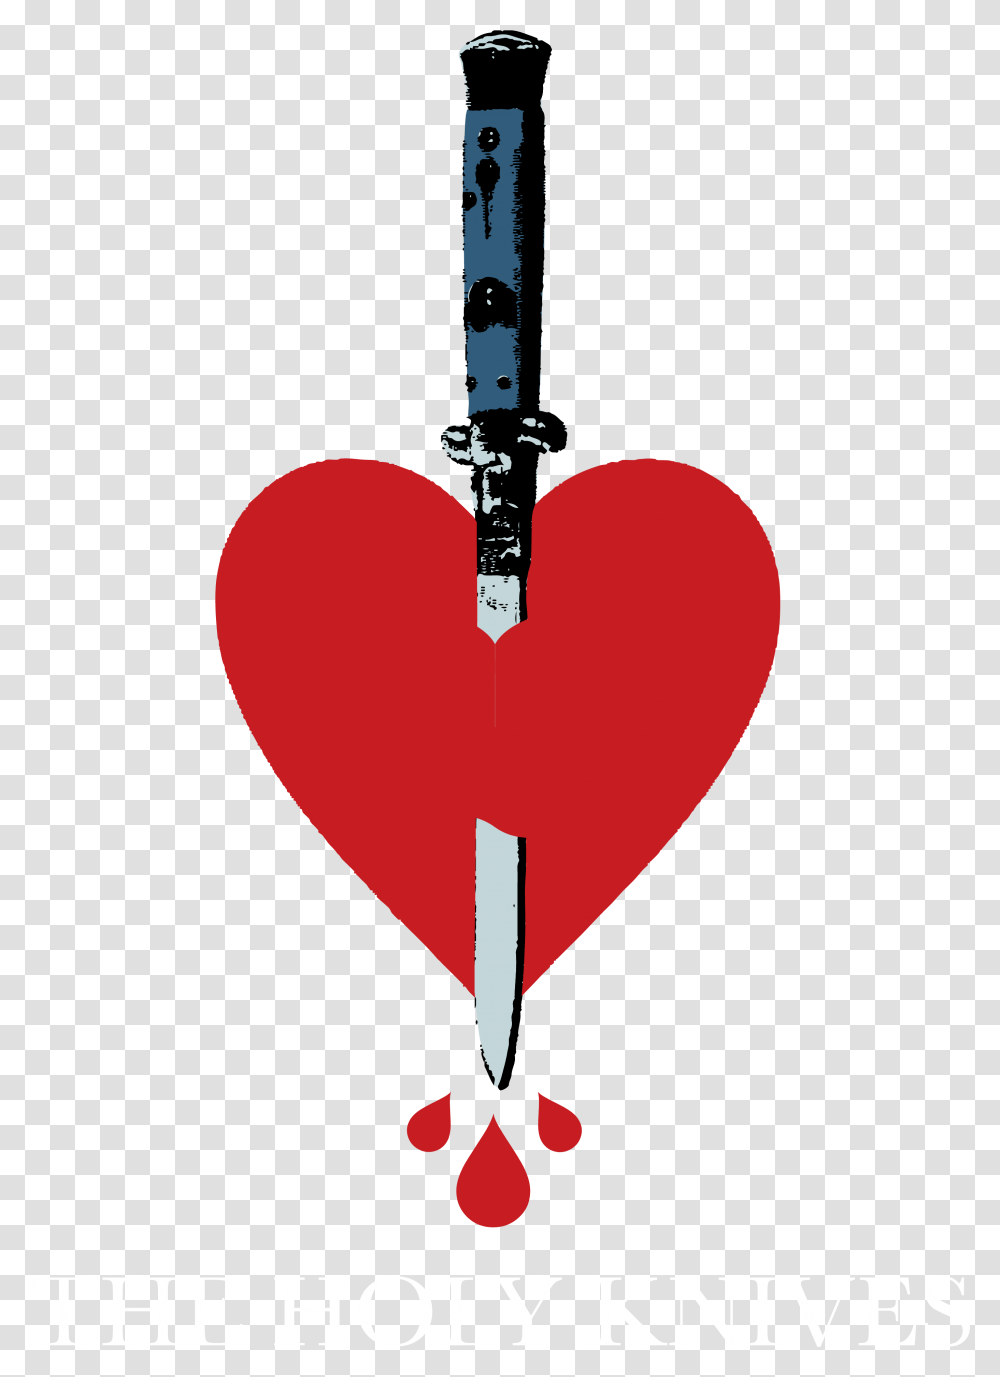 The Holy Knives Heart, Weapon, Weaponry, Label Transparent Png